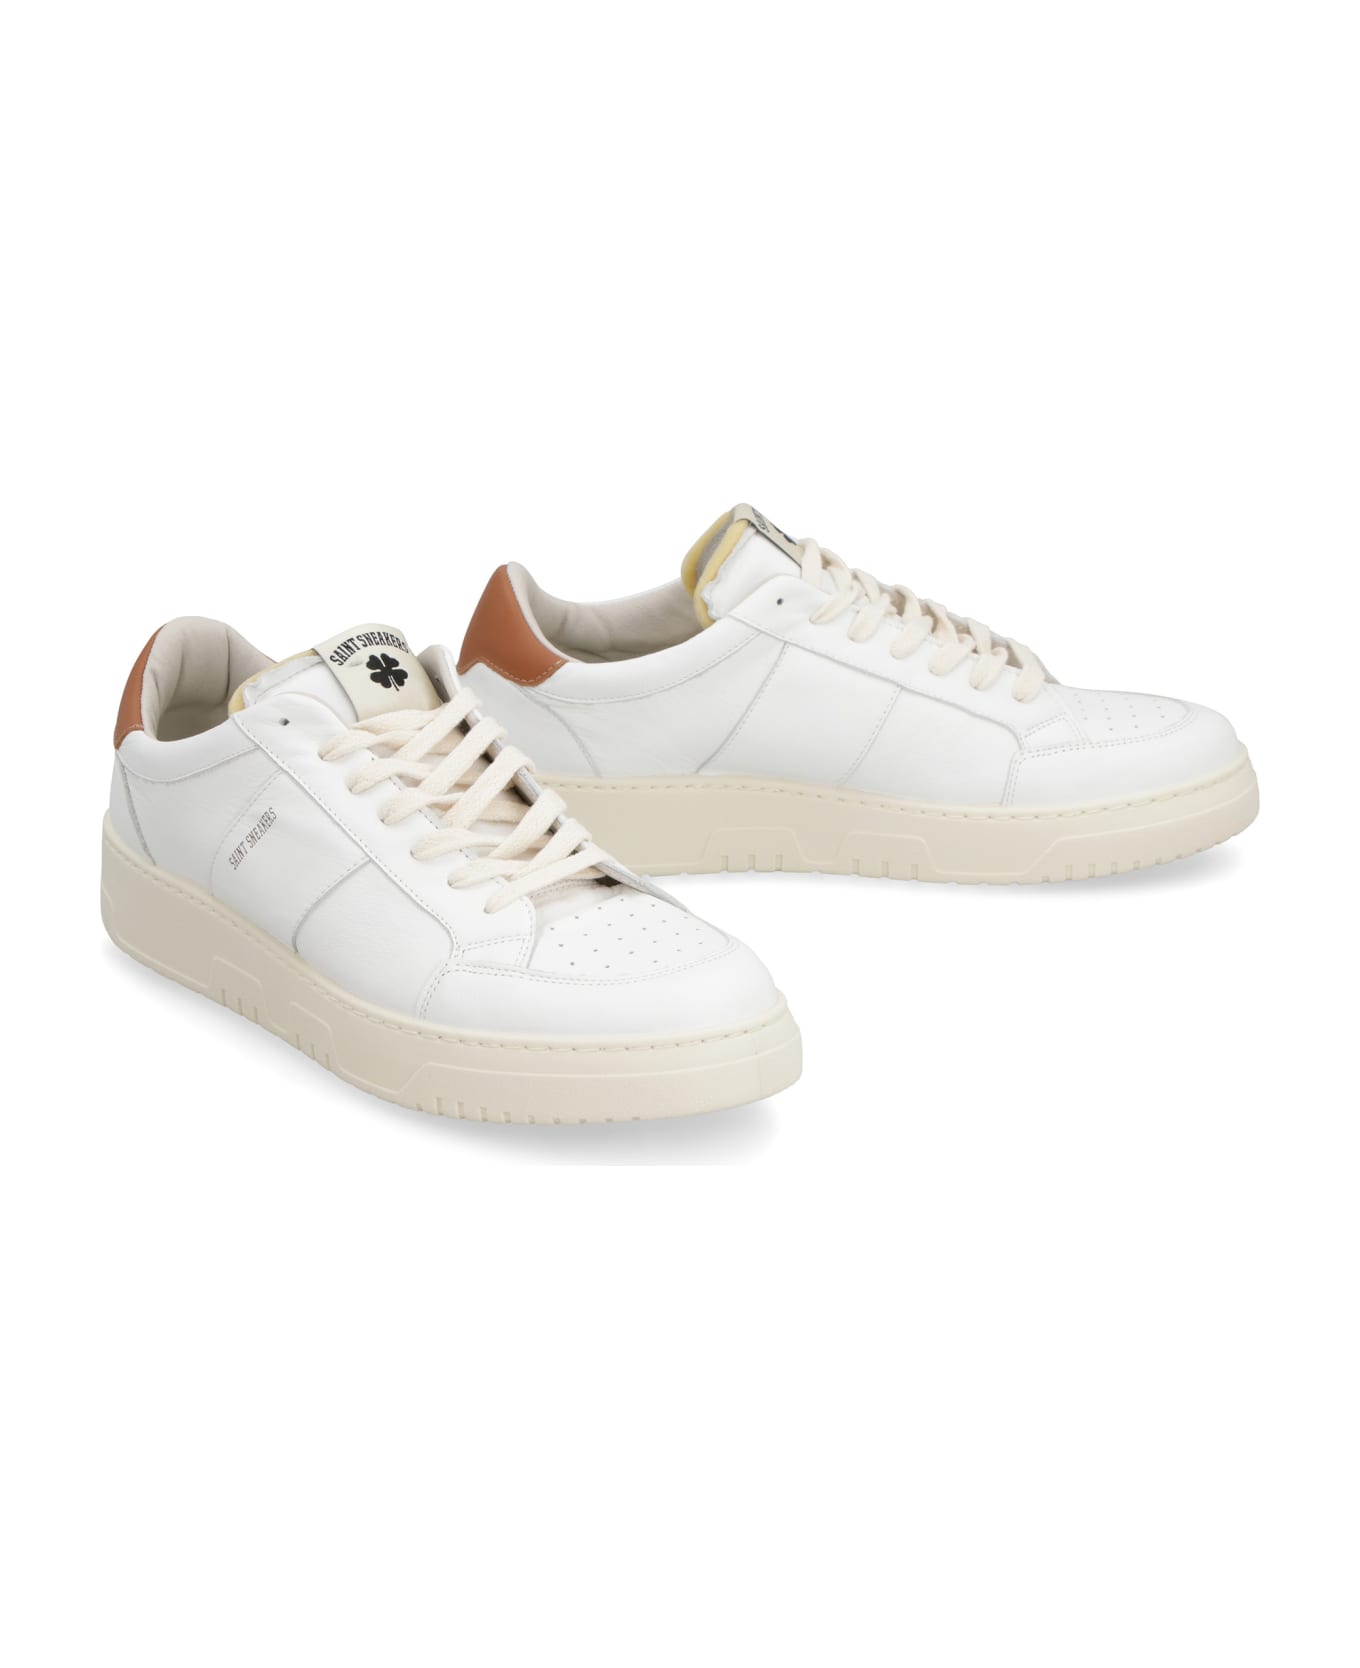 Saint Sneakers Golf Leather Low-top Sneakers - White/brown